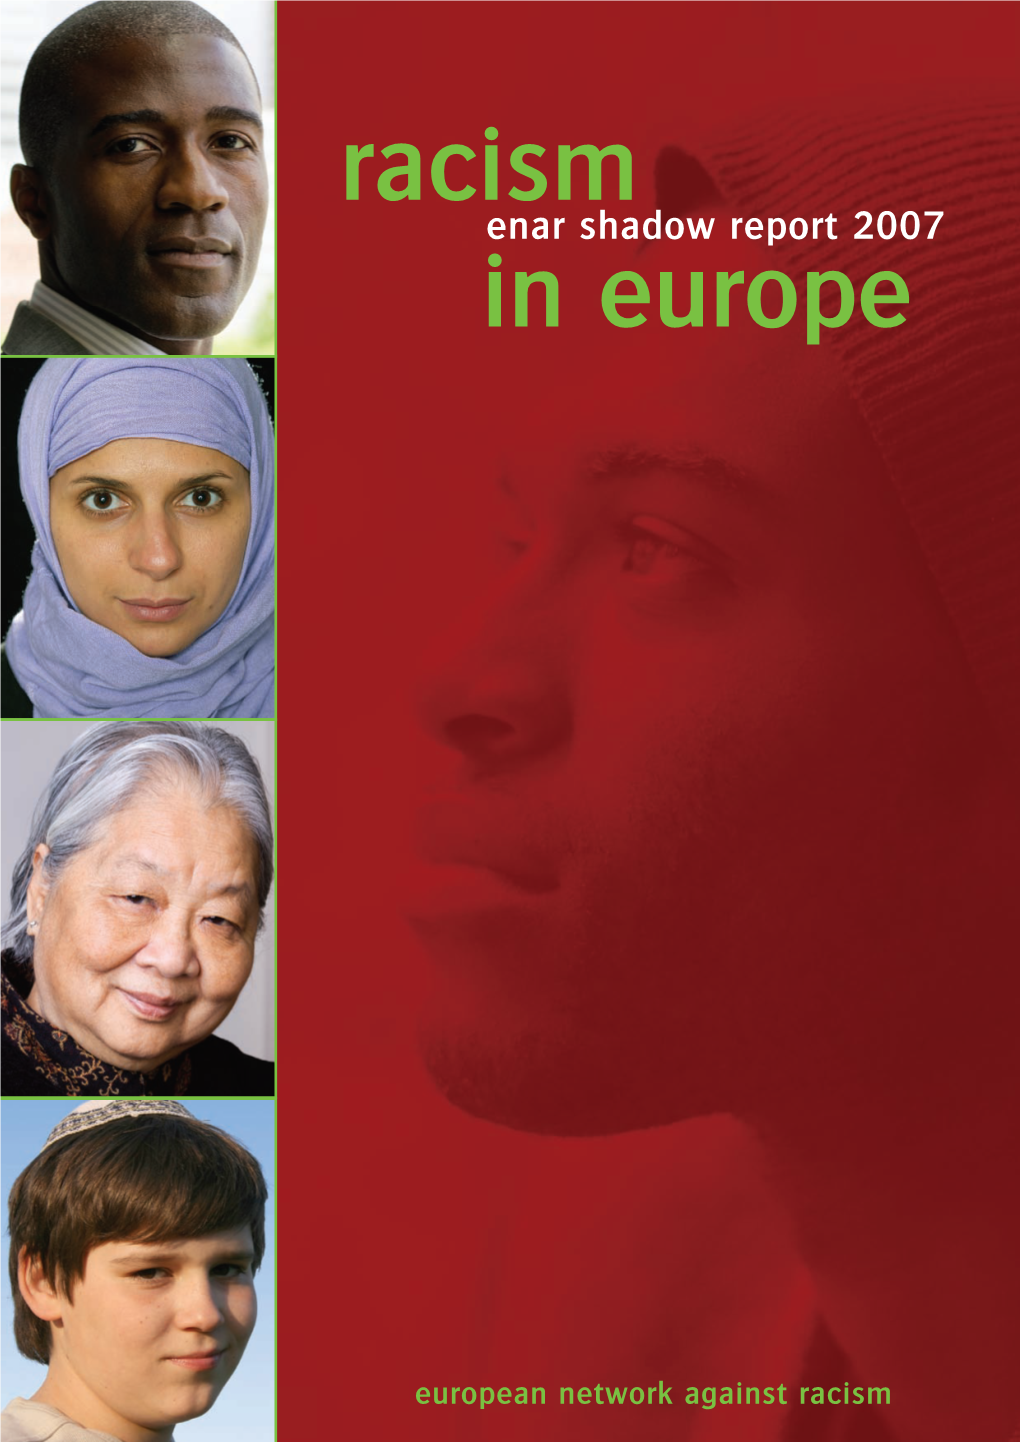 Racism in Europe Demonstrates That Many Barriers Still Persist in European Society